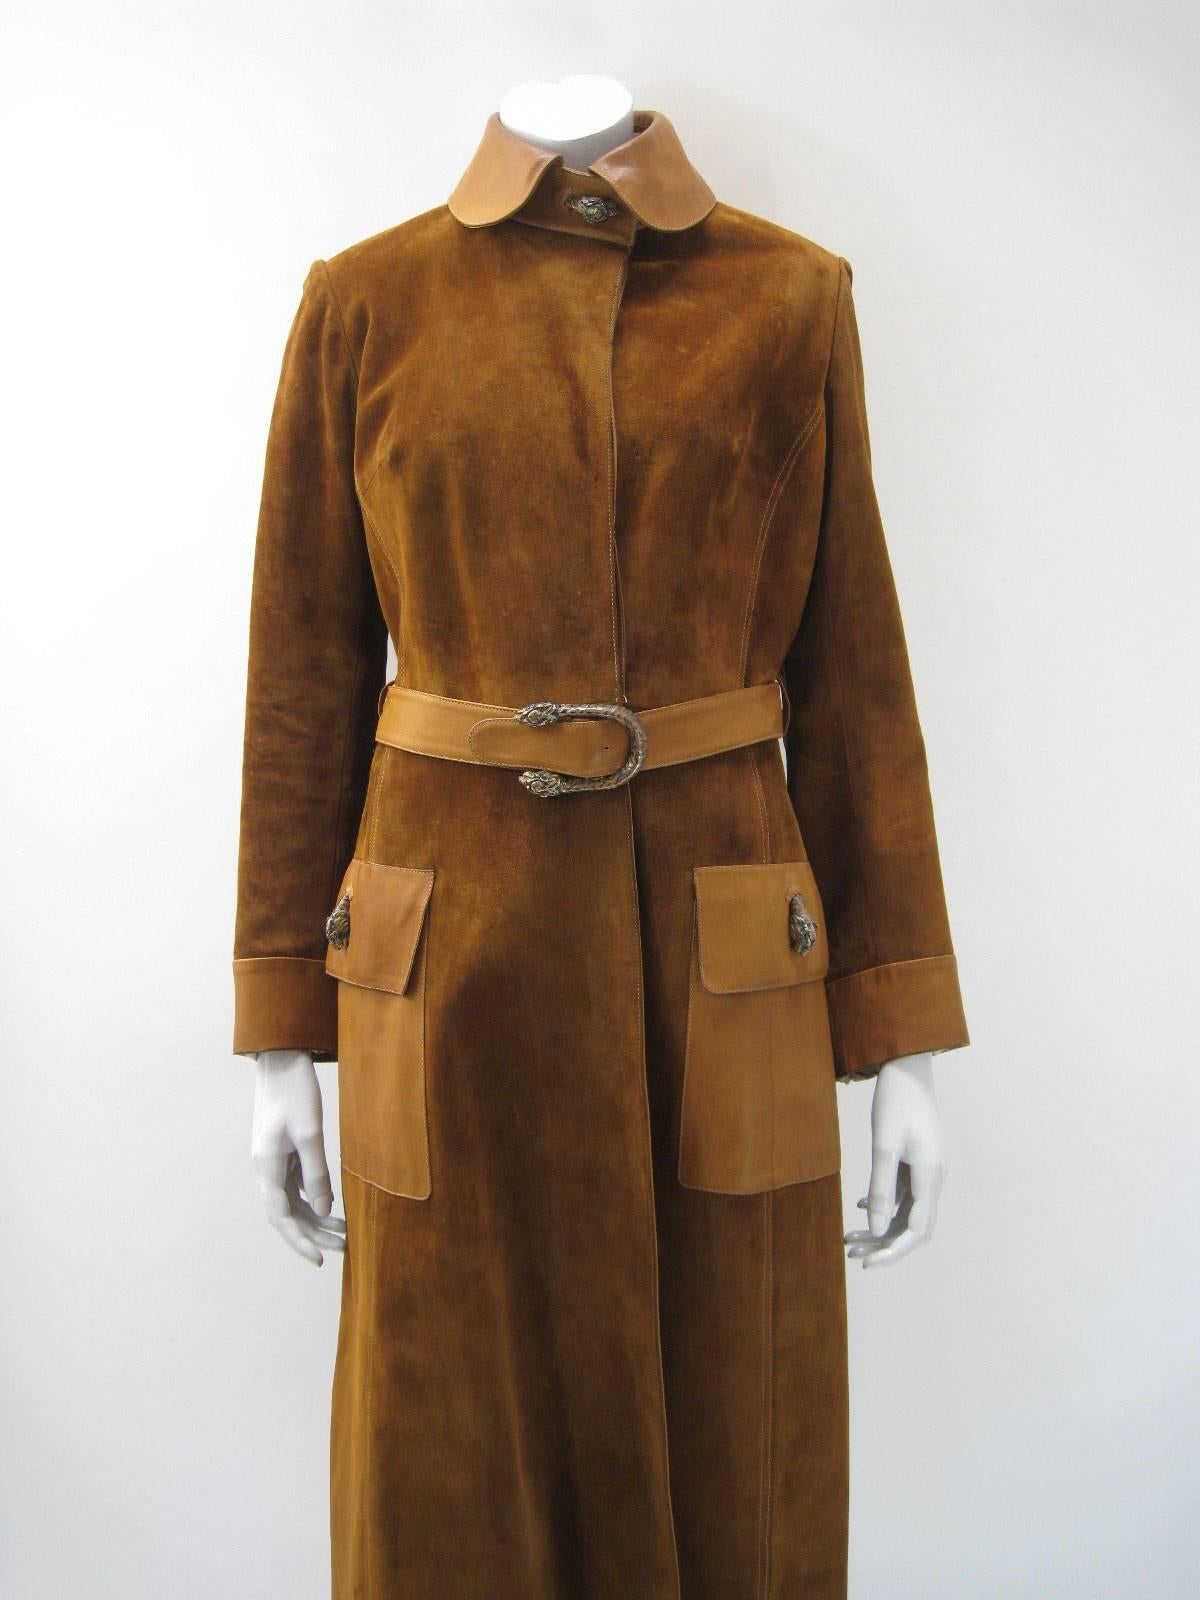 Vintage Gucci warm tan suede trench coat.

Heavier weight suede with sturdy leather trim and pockets.

Hidden button closure.

Self belted with double tiger belt buckle.

Painted metal tiger head hardware throughout.

Back slit with leather